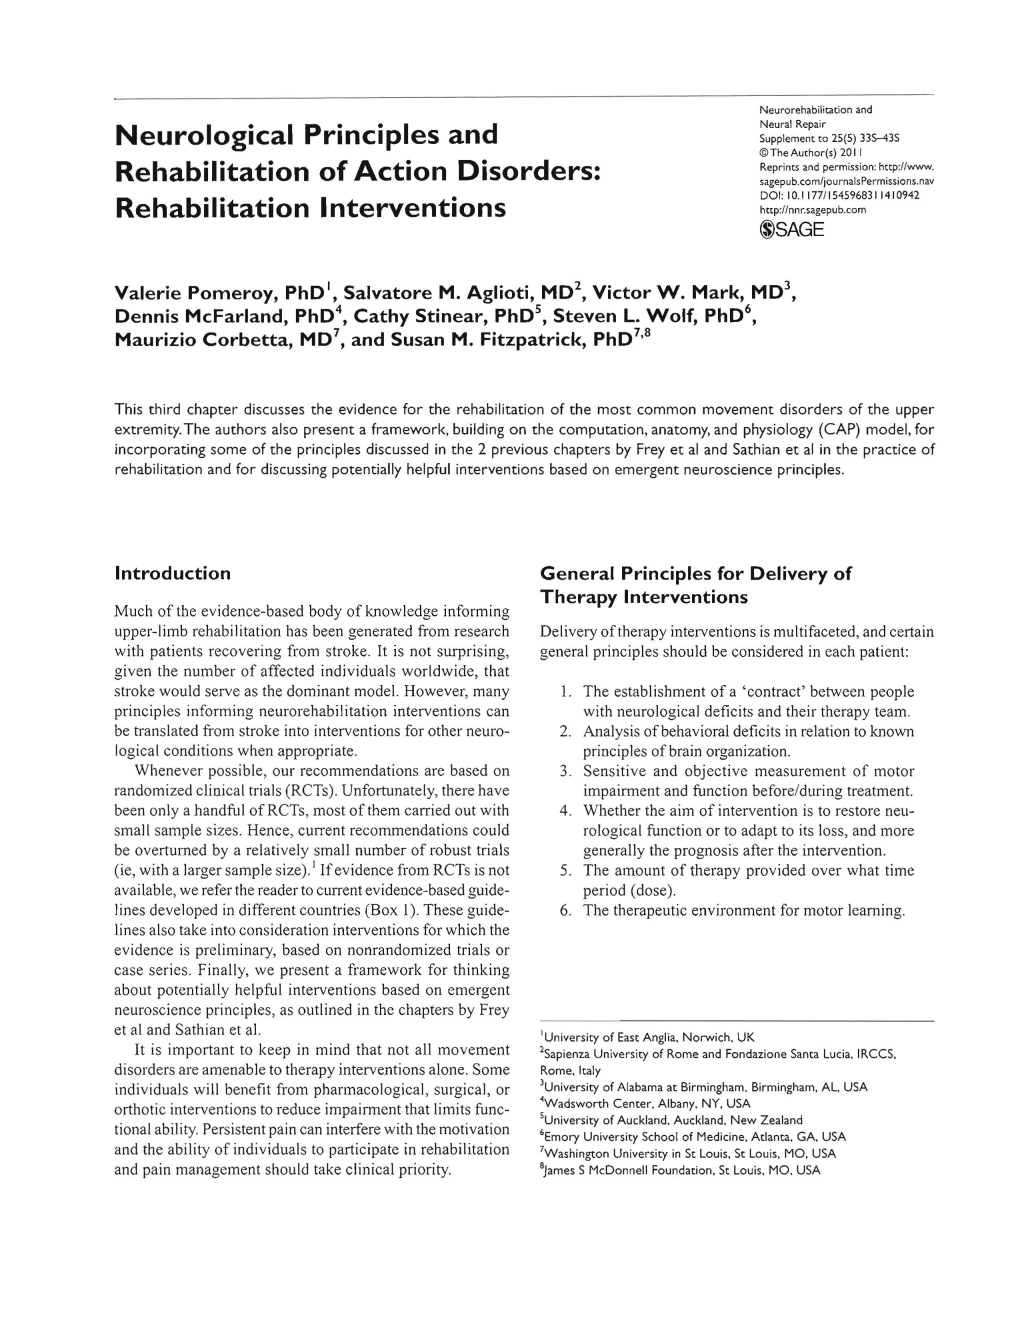 Neurological Principles and Rehabilitation of Action Disorders: Rehabilitation Interventions